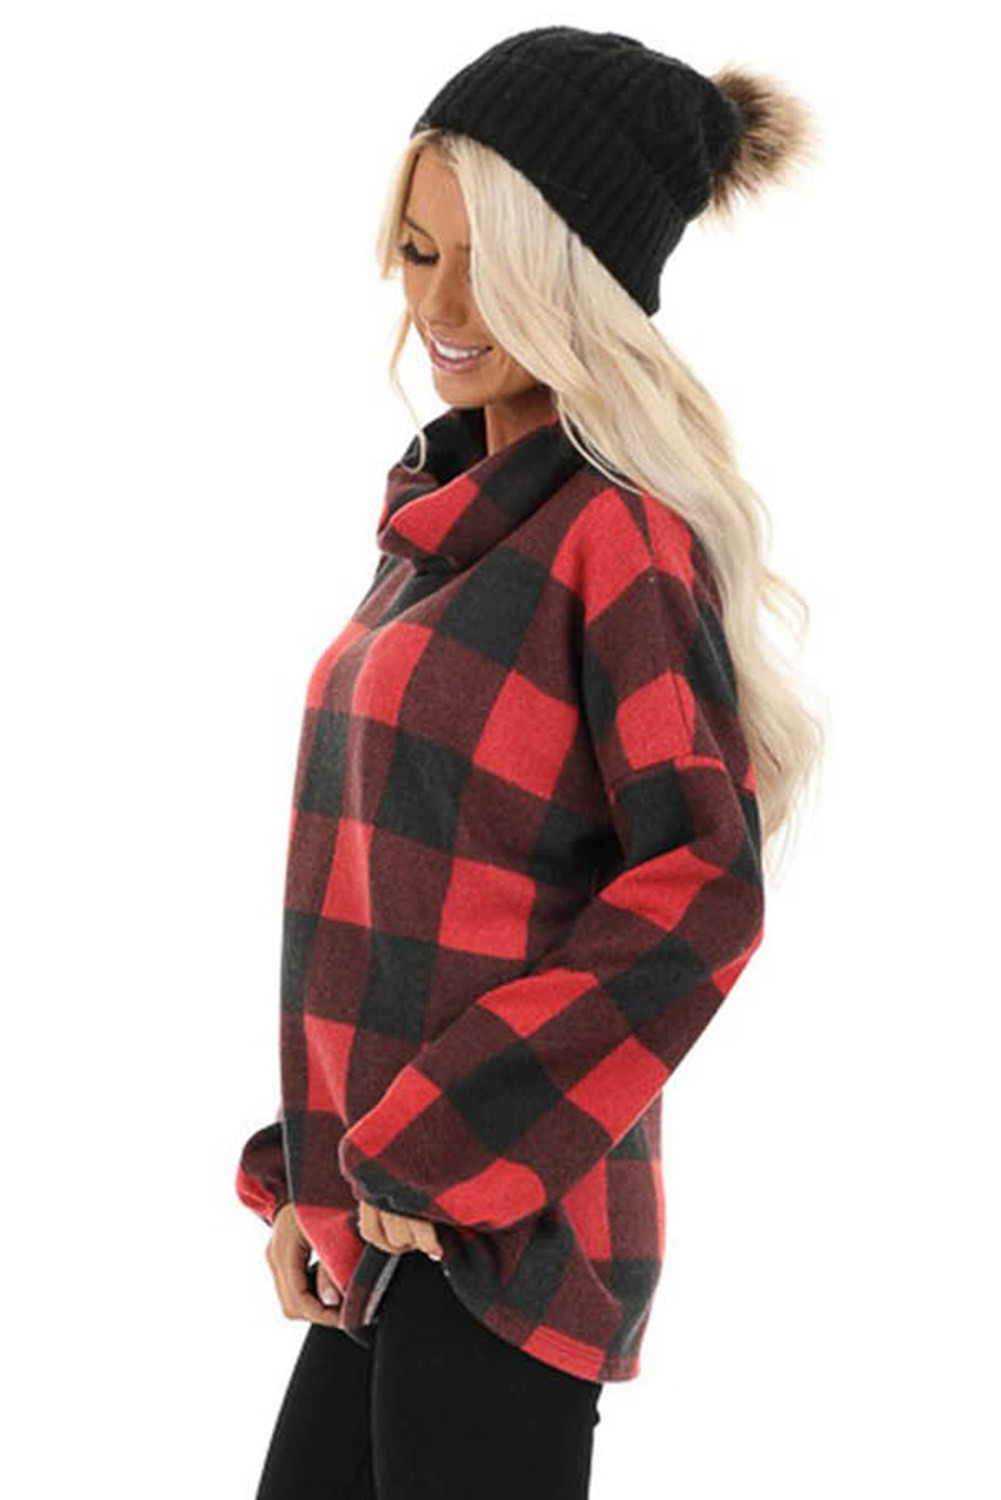 Wholesale Other Category, Cheap Red Buffalo Plaid Fleece Turtleneck Long Sleeve Top Online